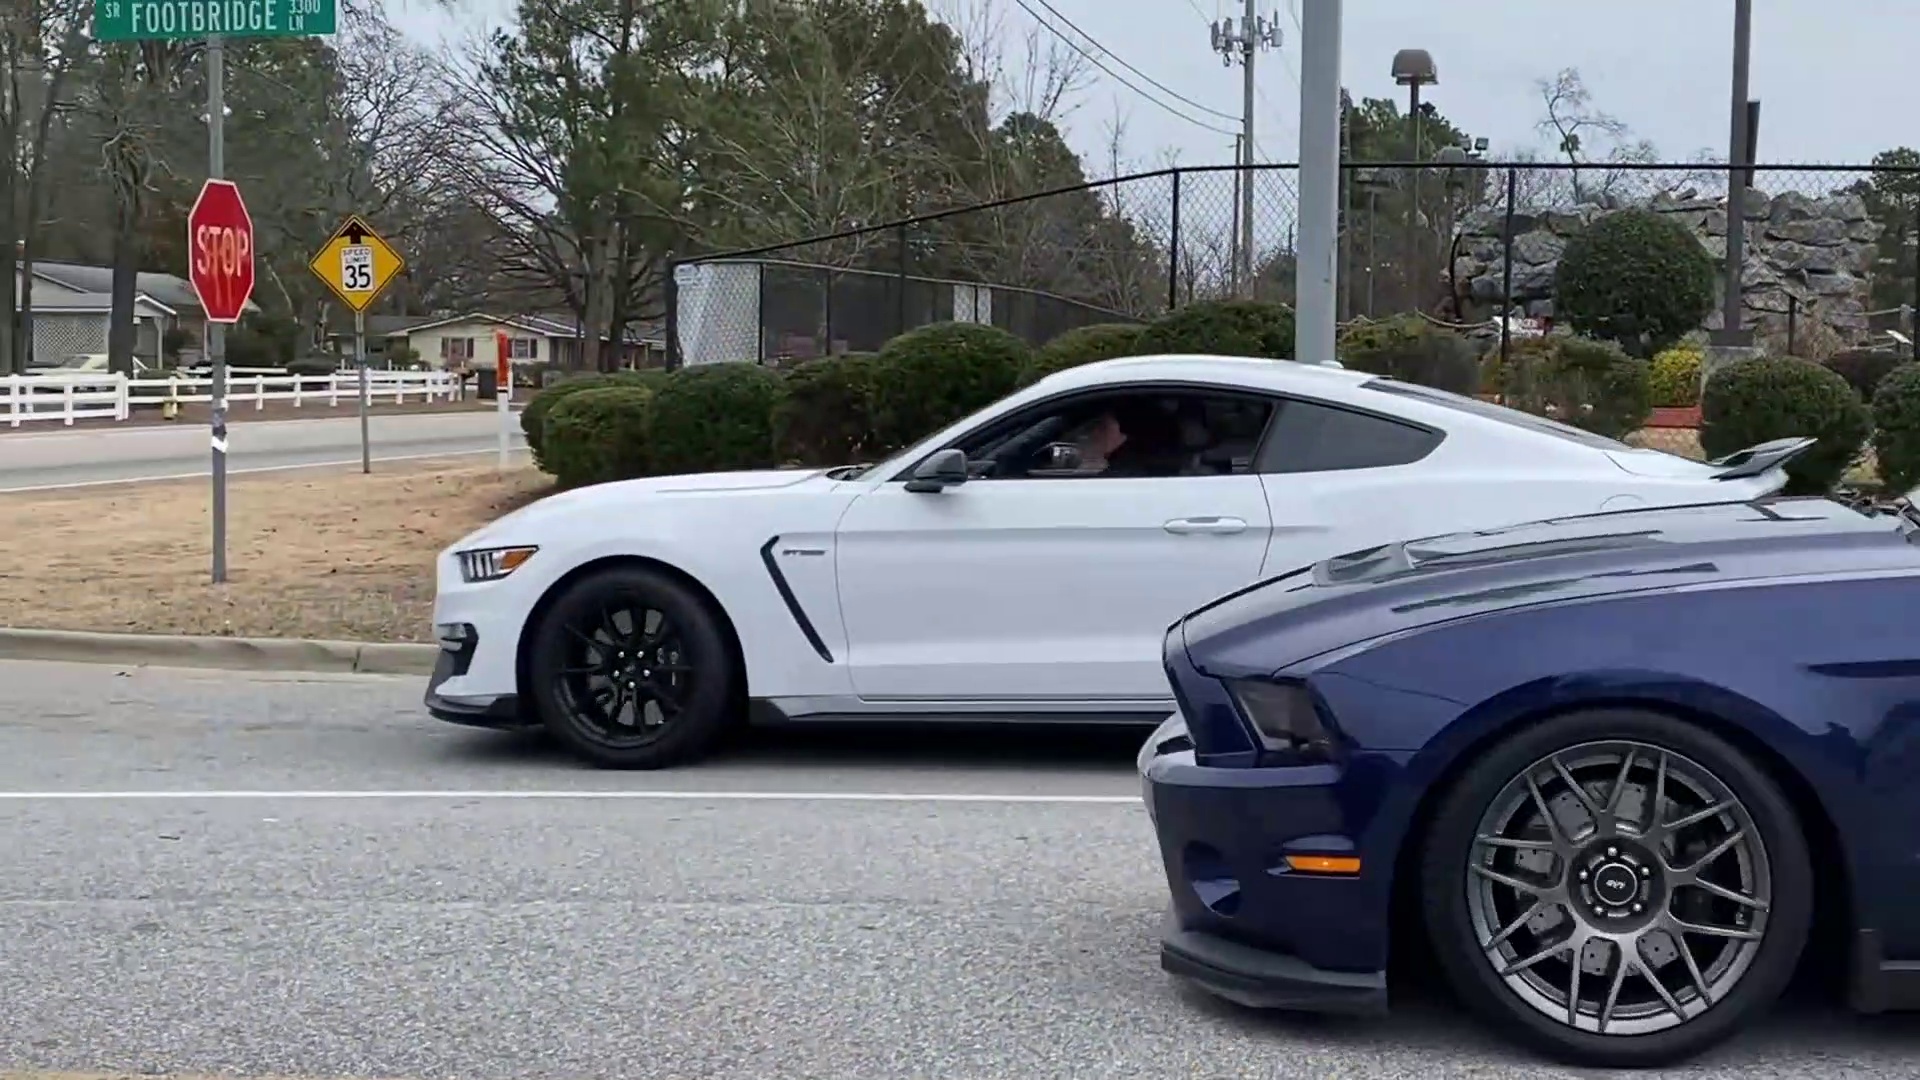 Leaving cars and coffee: Loud exhaust clips, exotic car spotting, and modded muscle cars